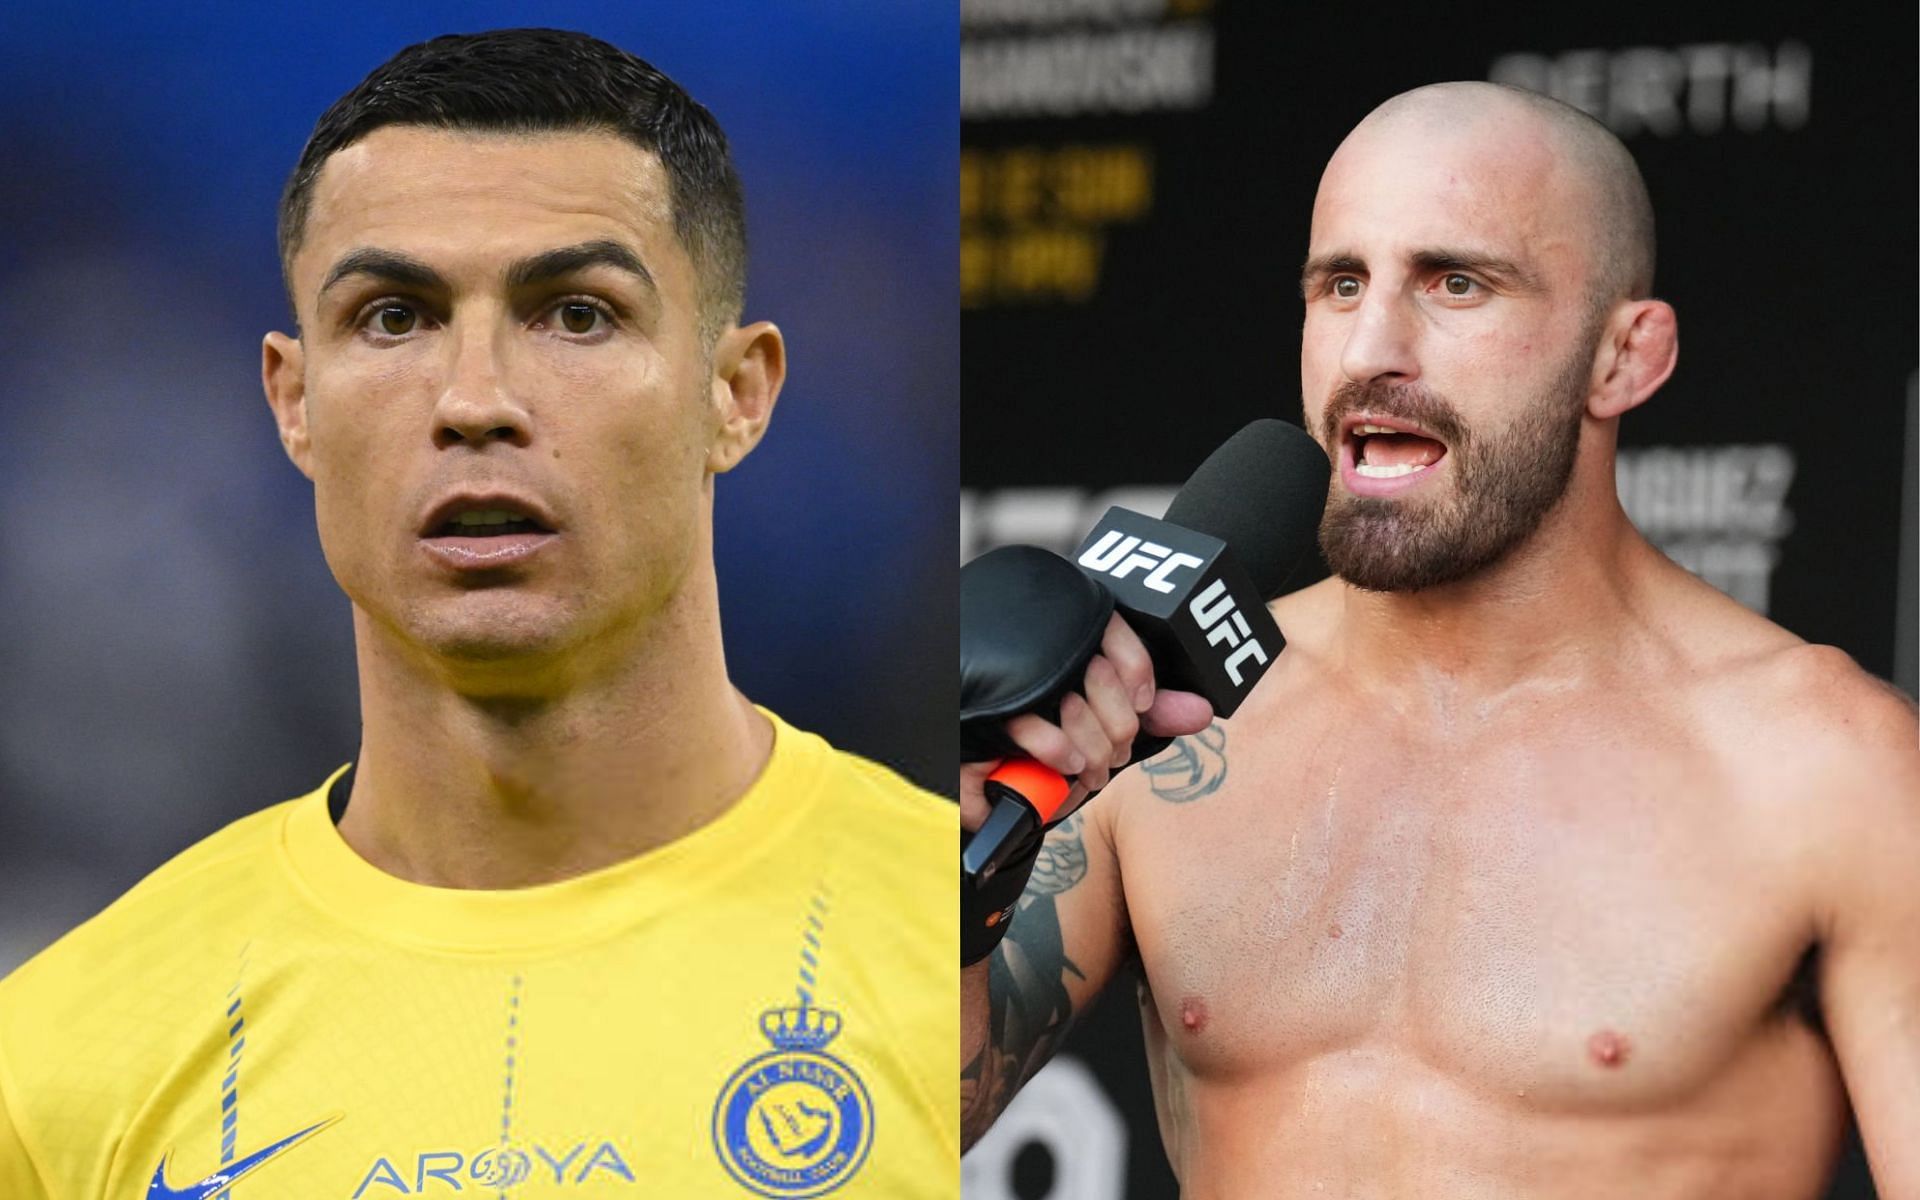 Cristiano Ronaldo (left) and Alexander Volkanovski (right) [Images Courtesy: @GettyImages]